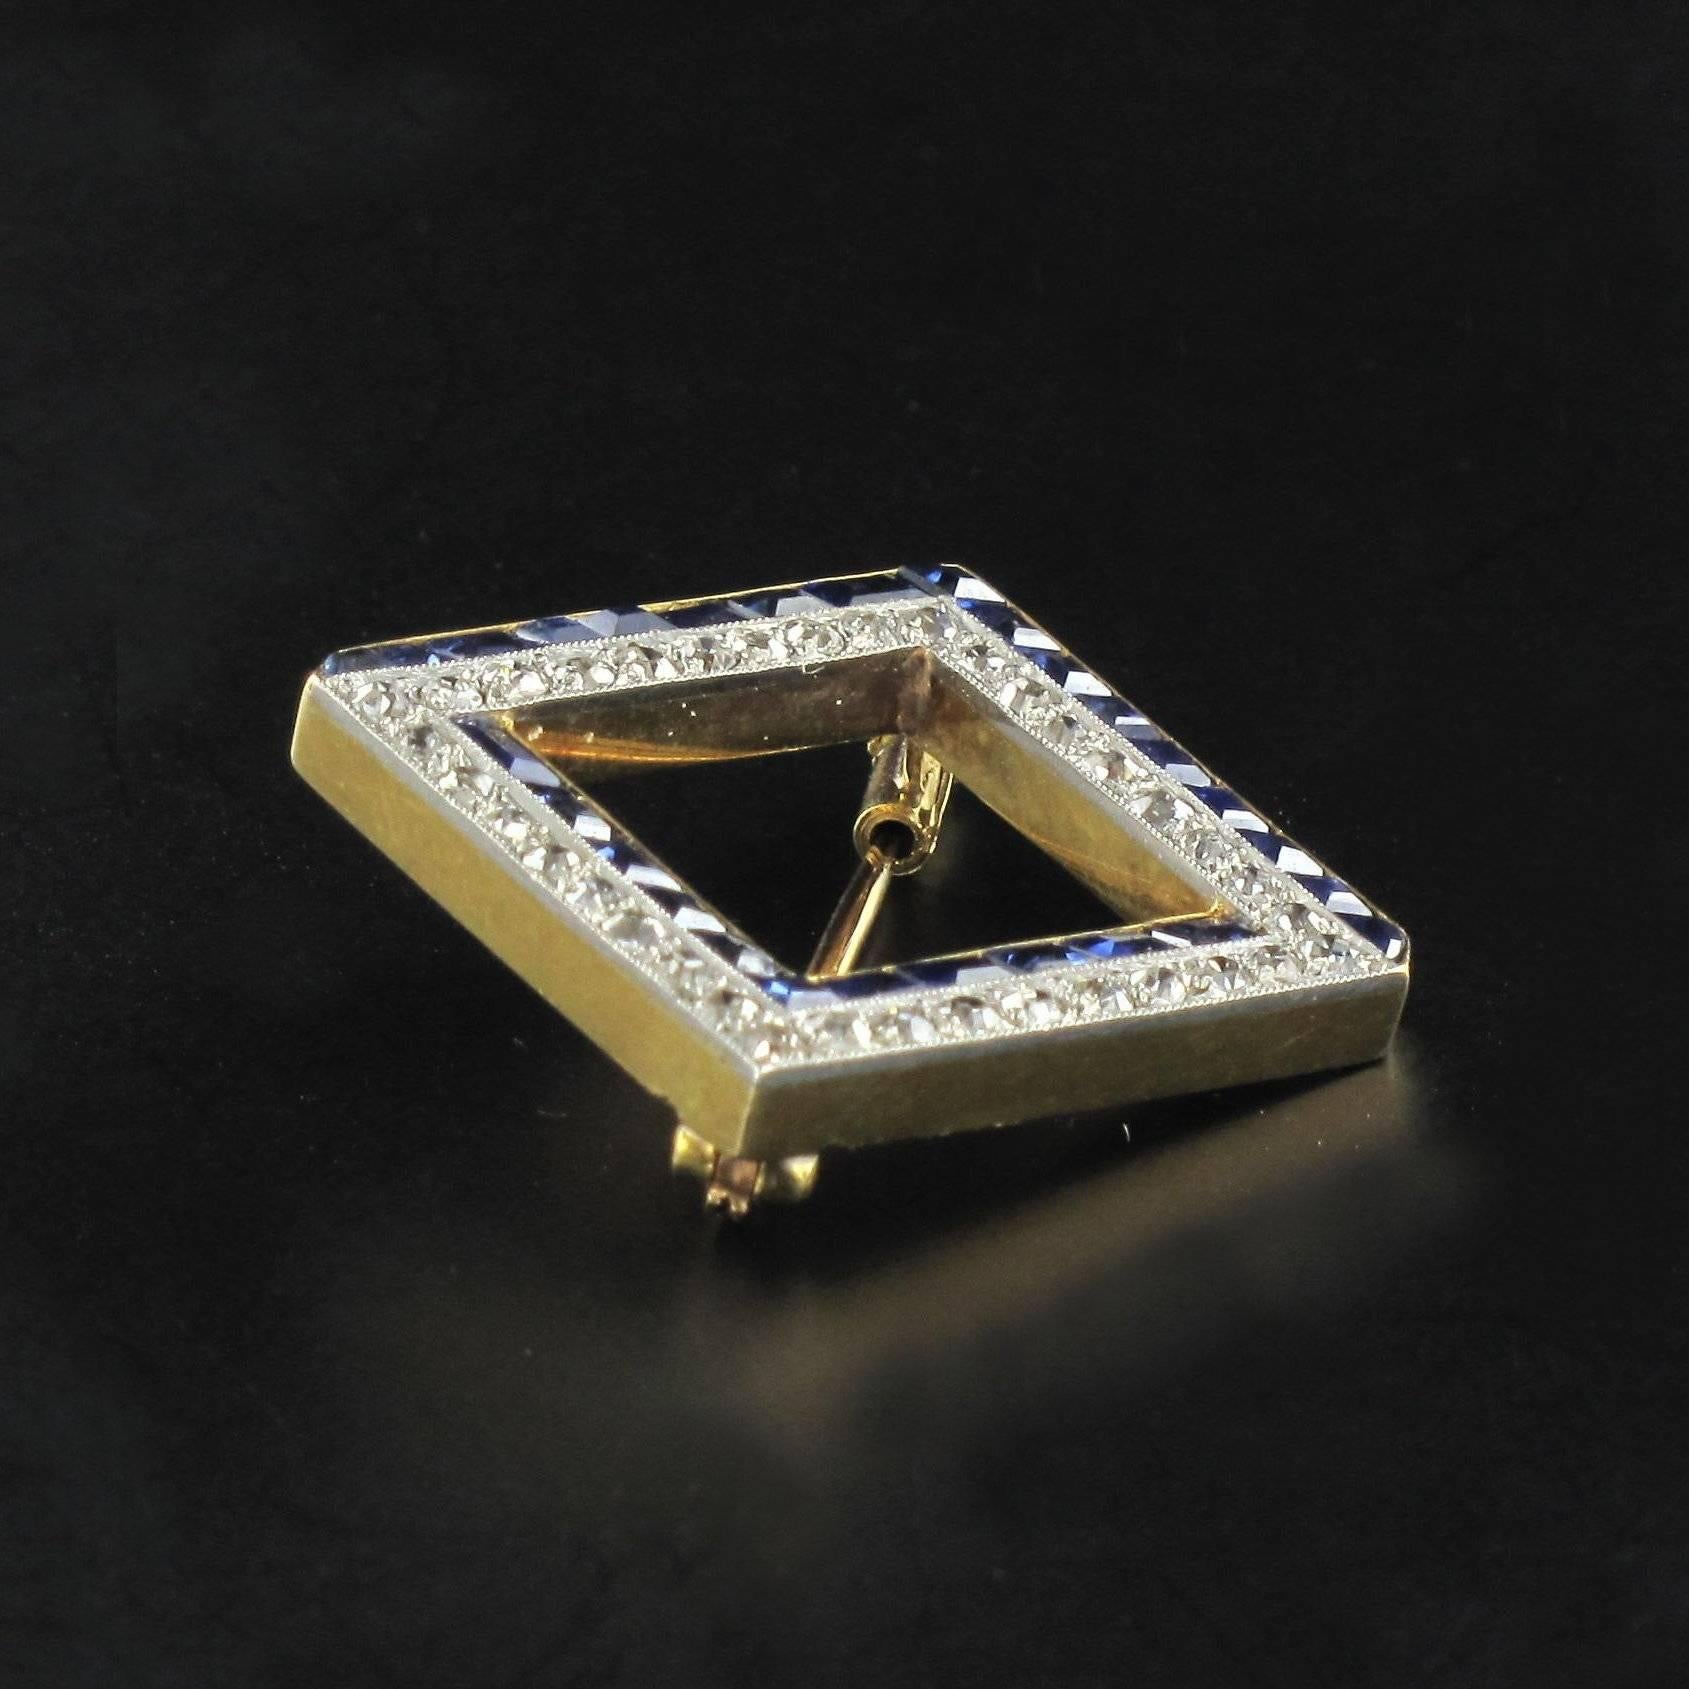 Brooch in 18K yellow gold and platinum, eagle head hallmark.

The sides of this square brooch are set asymmetrically with rows of brilliant cut diamonds and calibrated blue sapphires around an open centre.  The clasp is a pump pin. 

Total